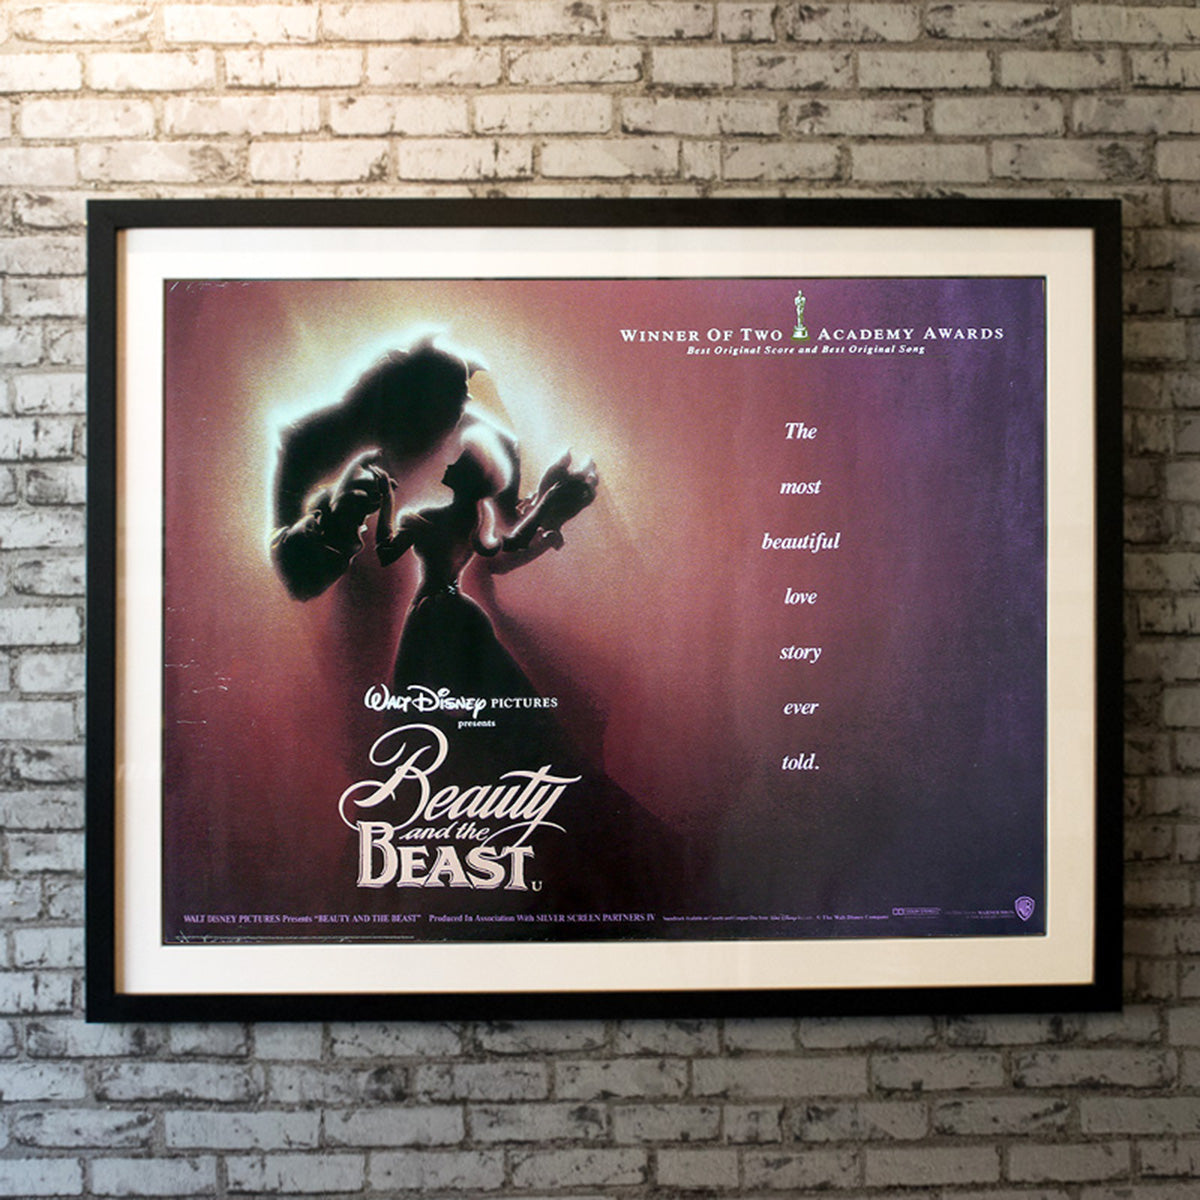 Original Movie Poster of Beauty And The Beast (1991)